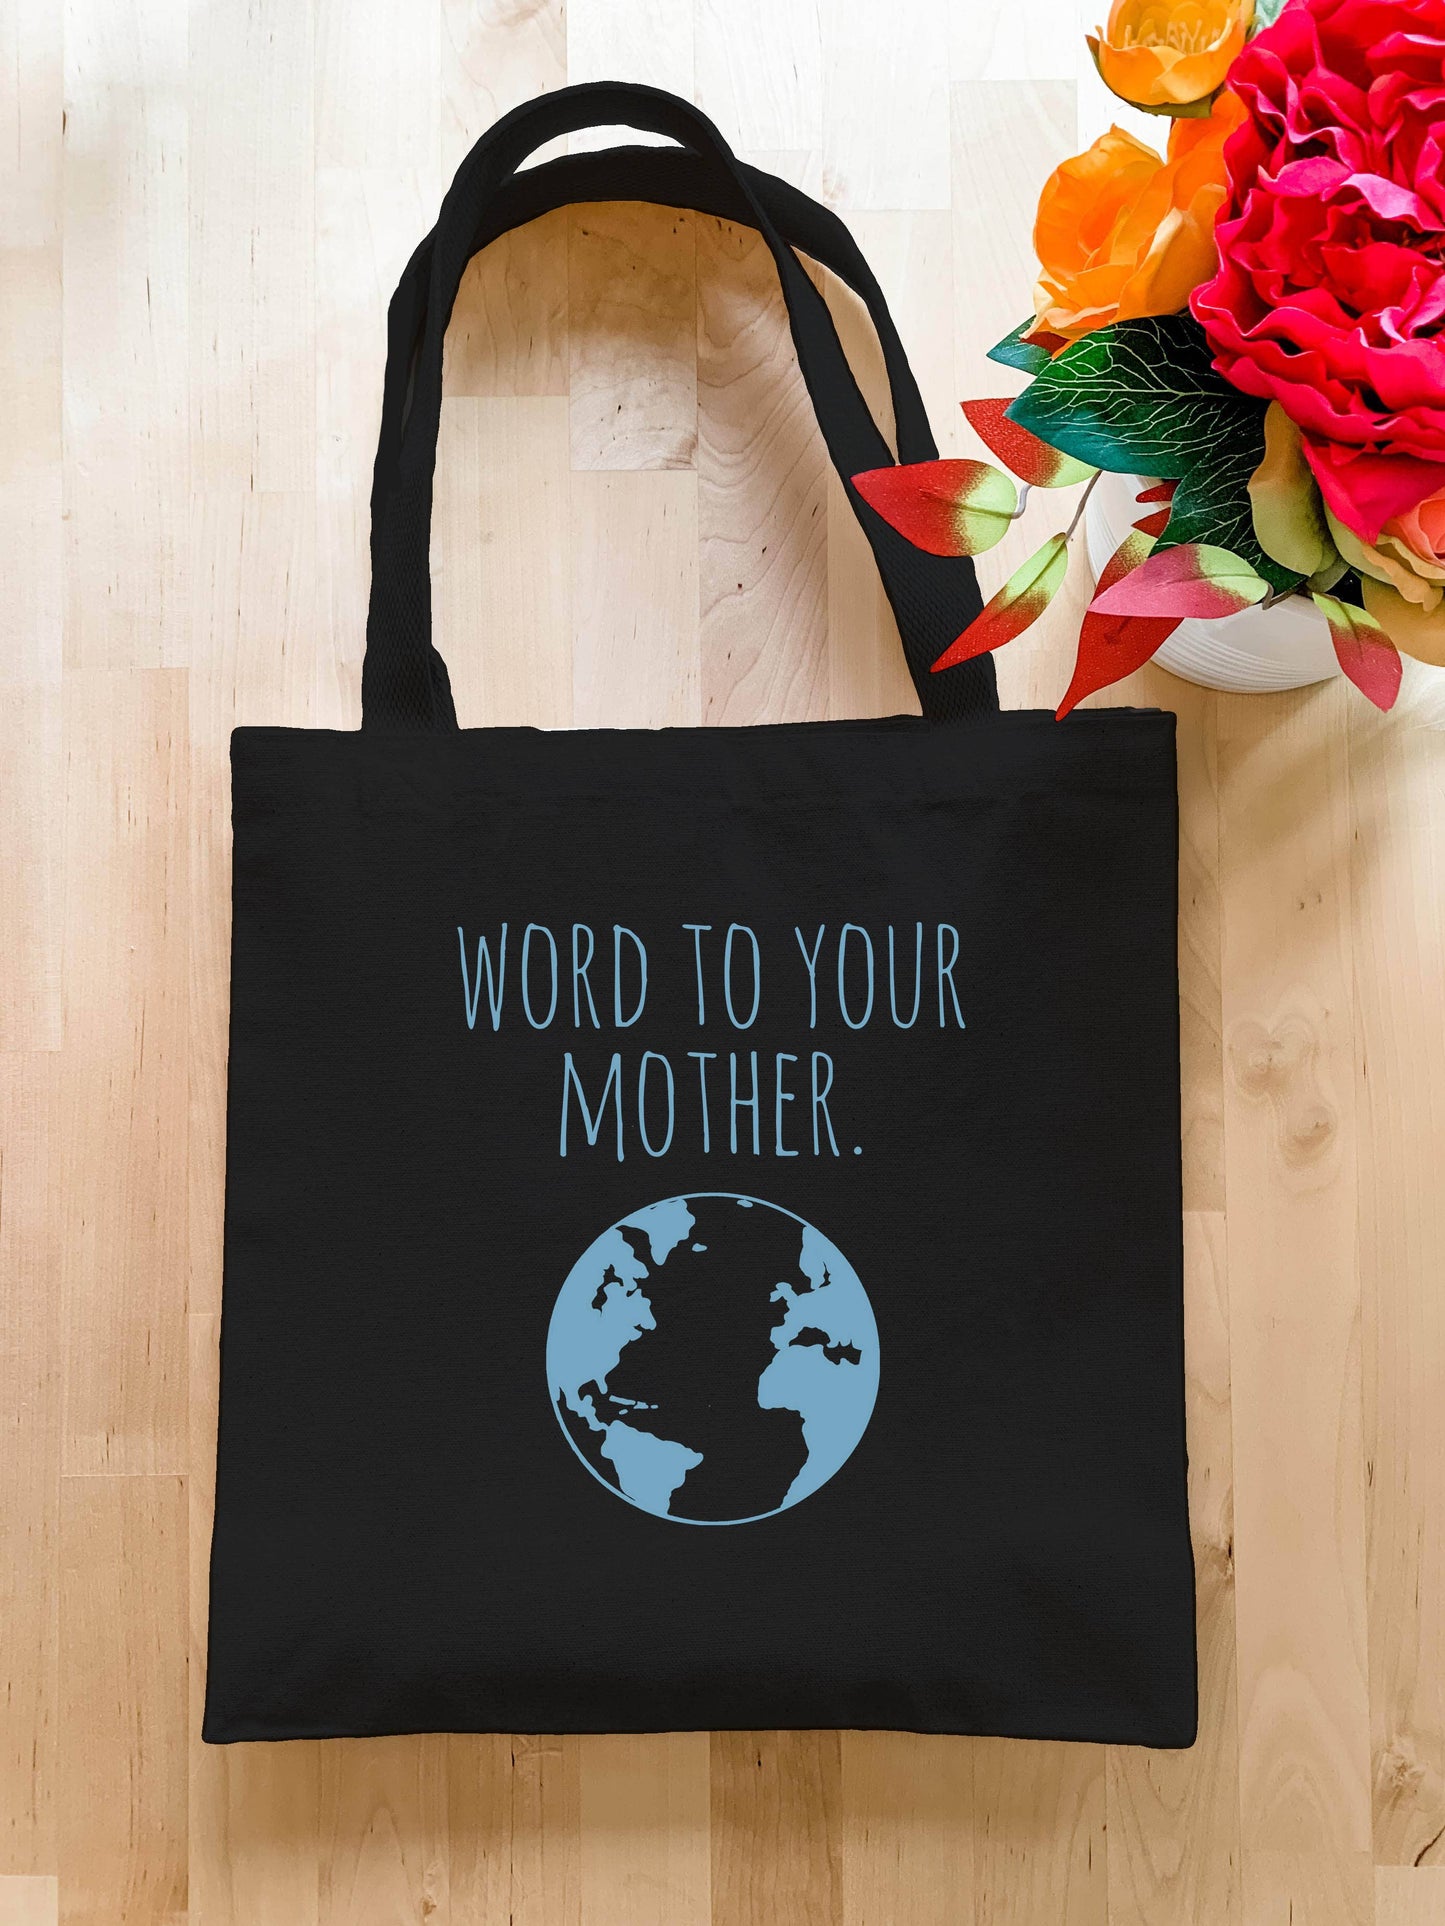 Word To Your Mother - Black Tote Bag